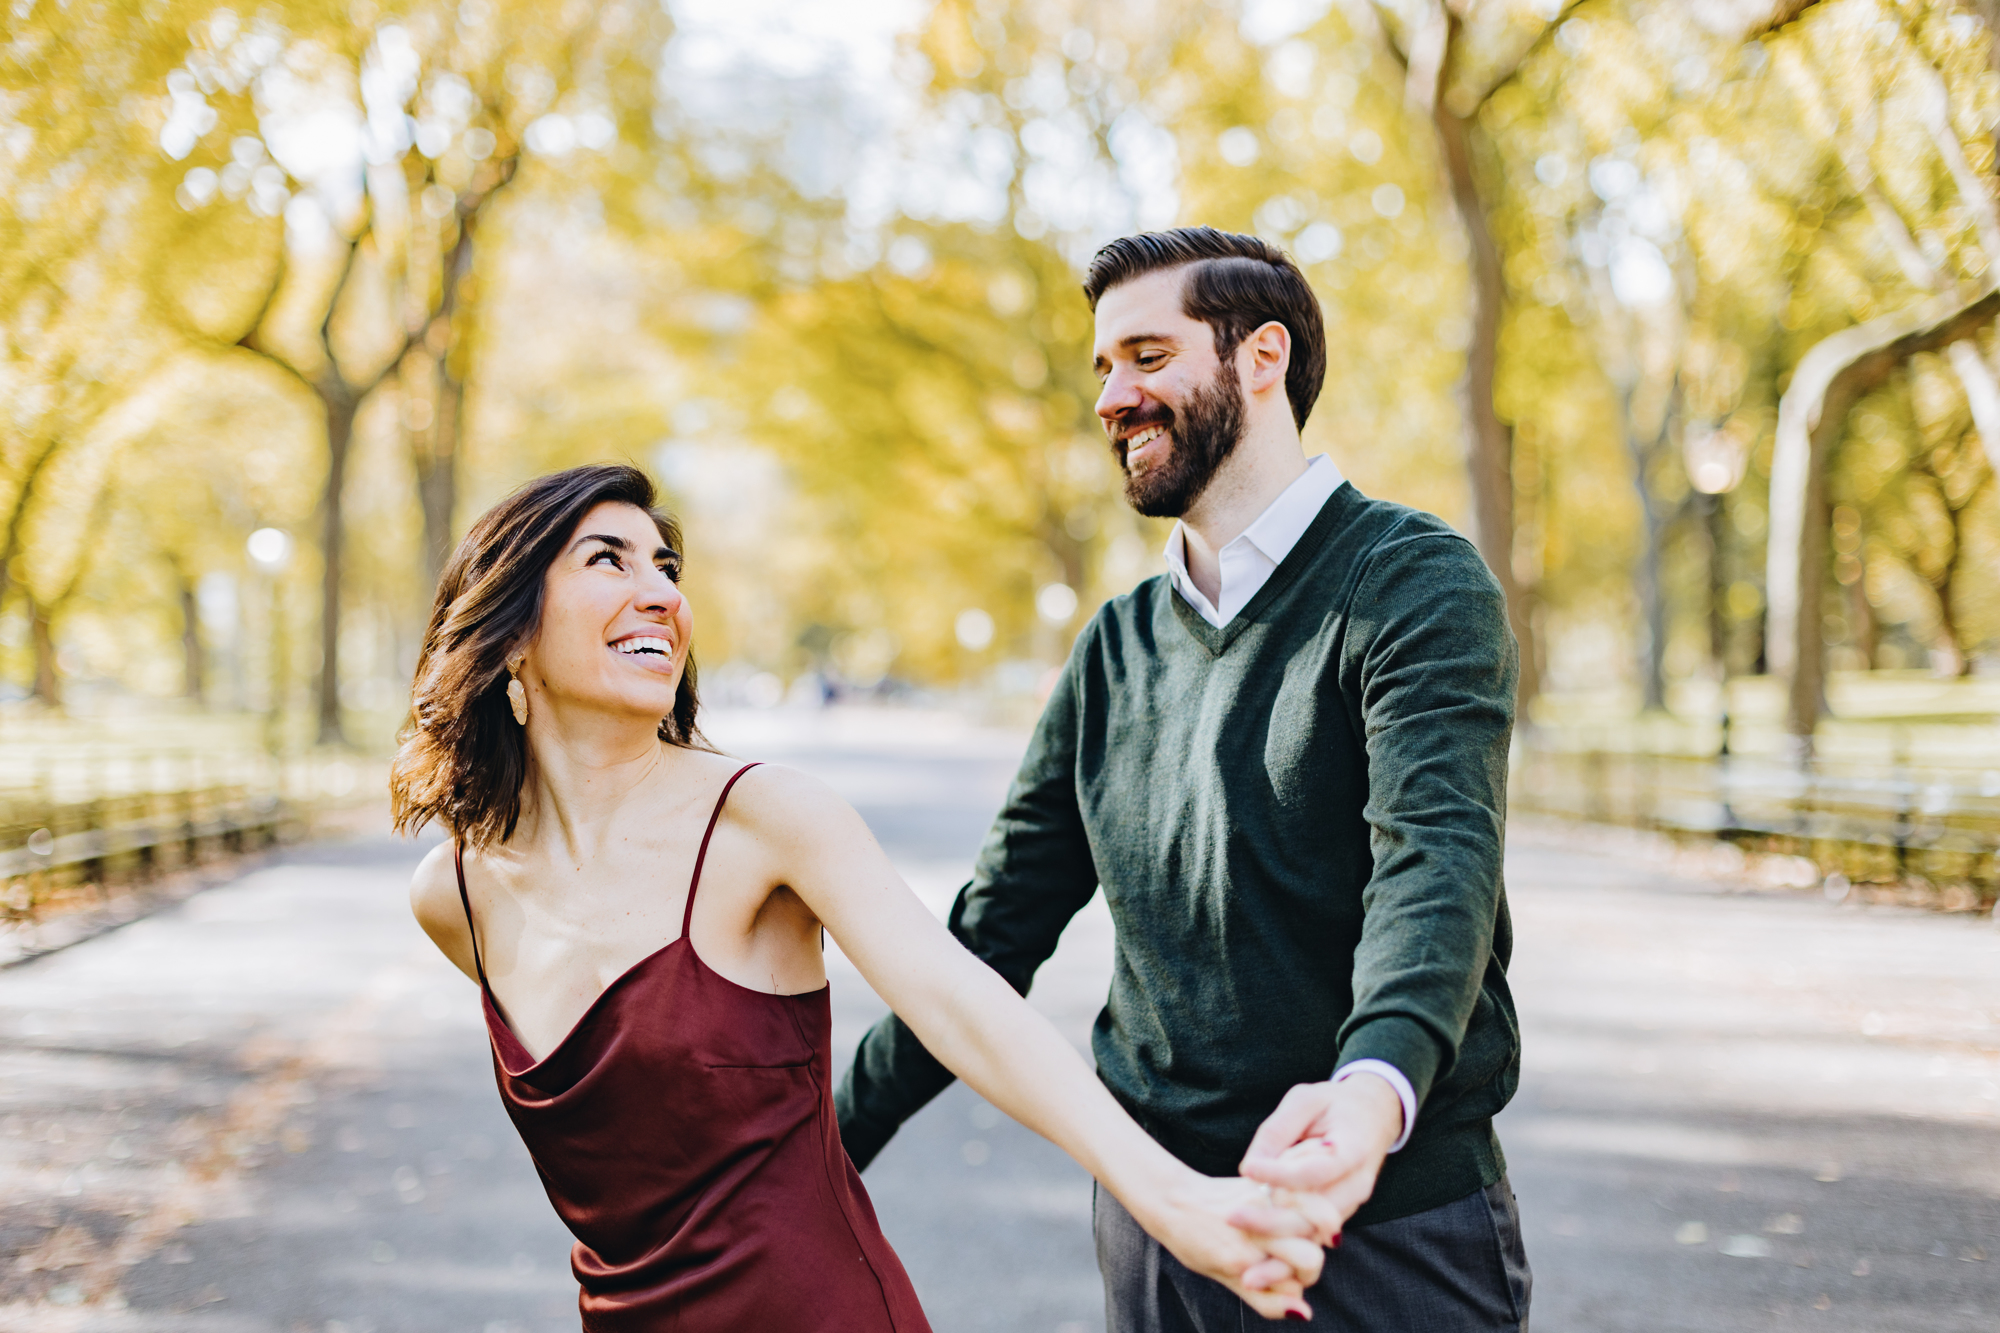 Unforgettable Central Park Engagement Photos in Fall